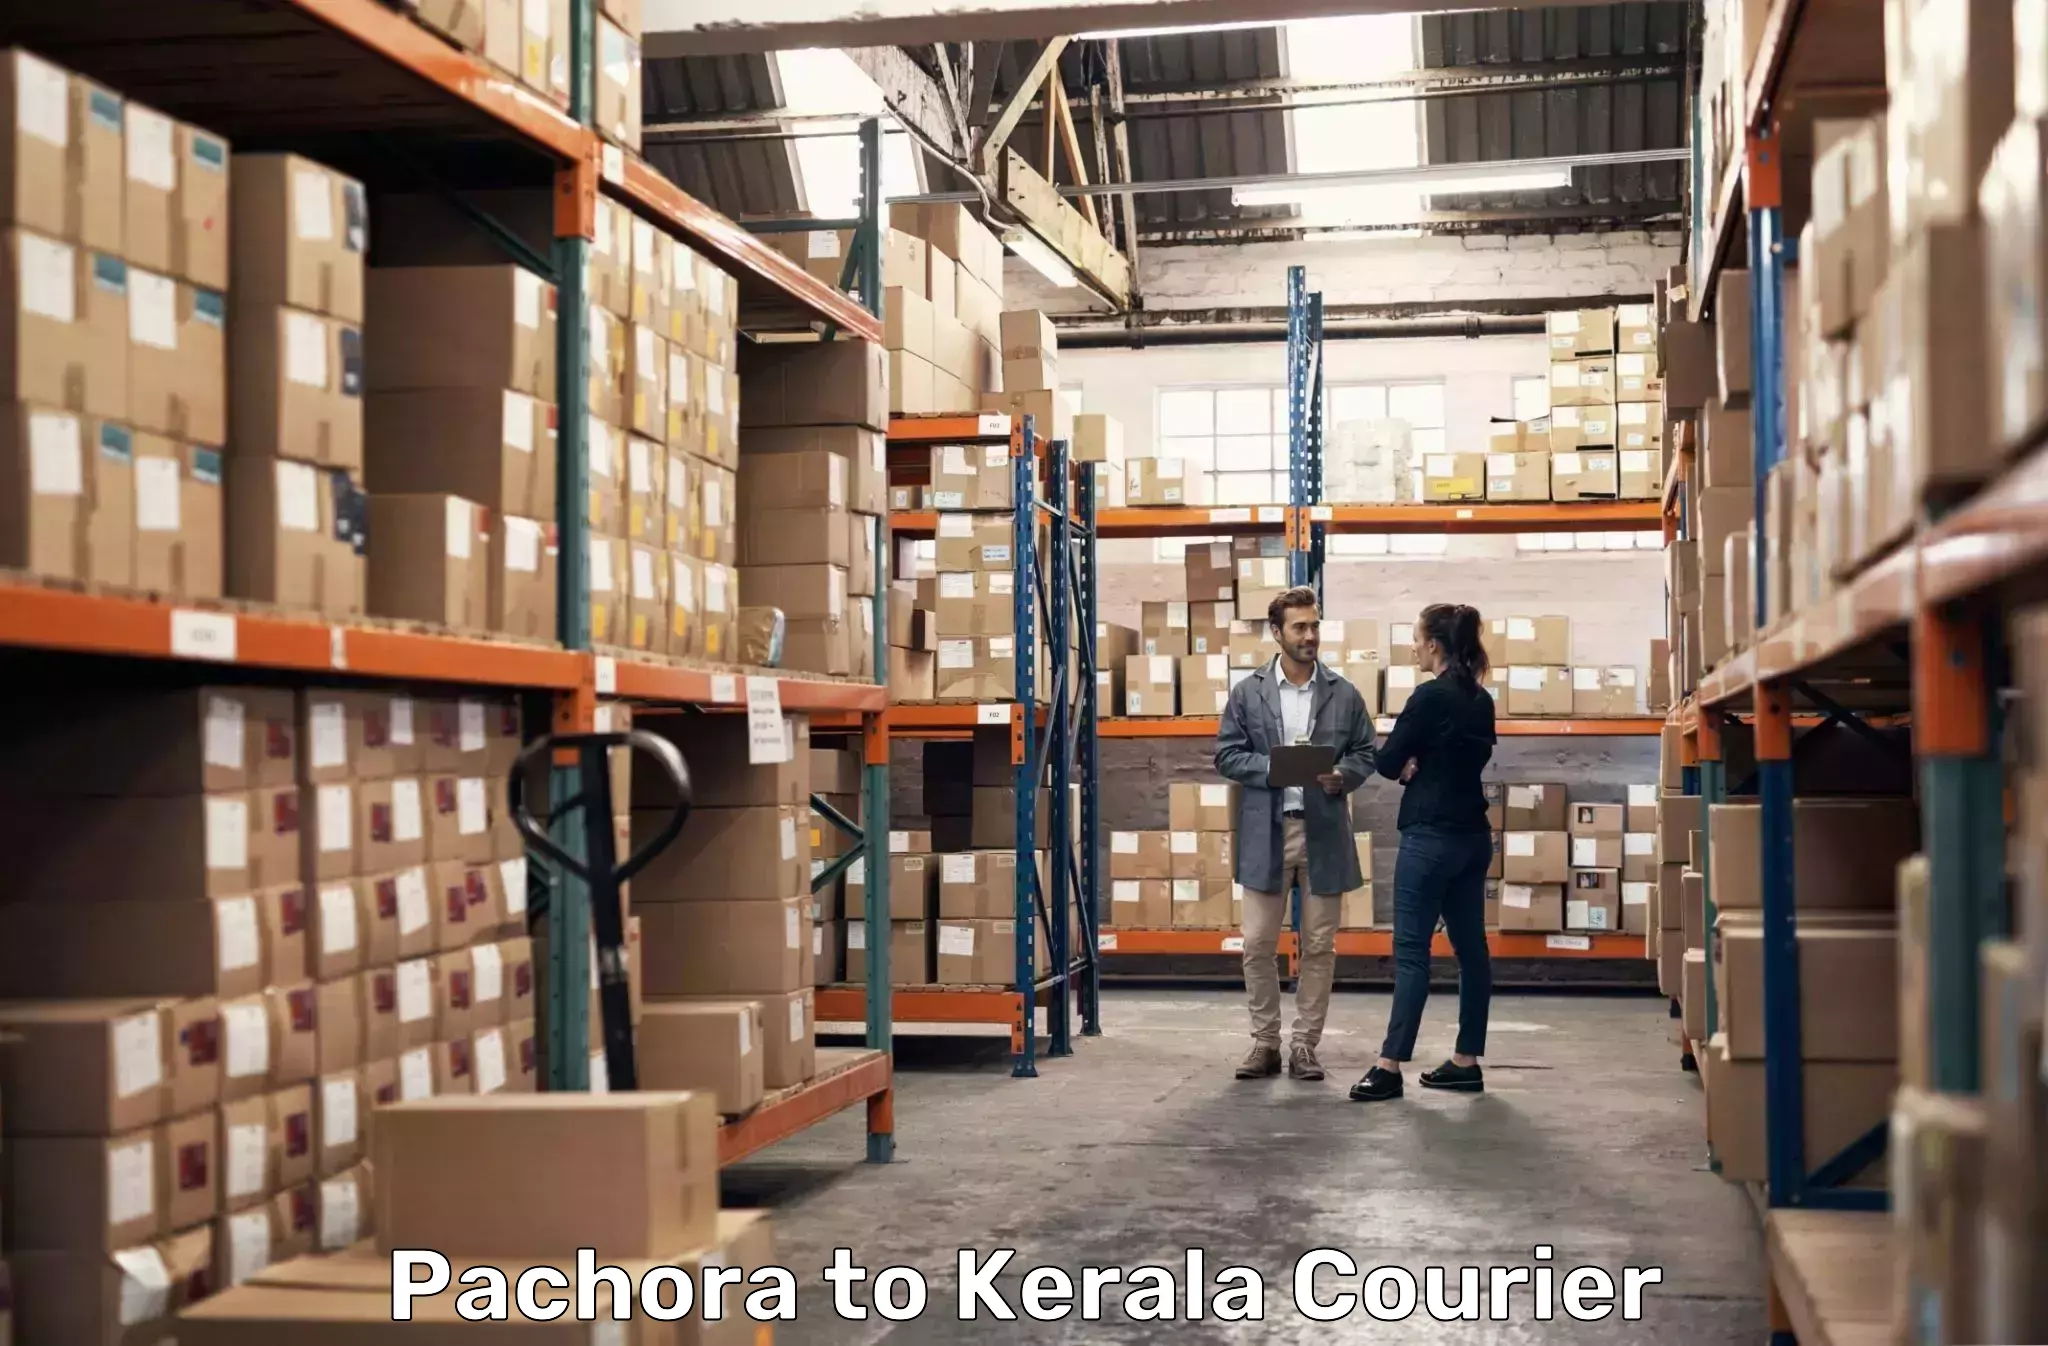 Express delivery network Pachora to Kerala